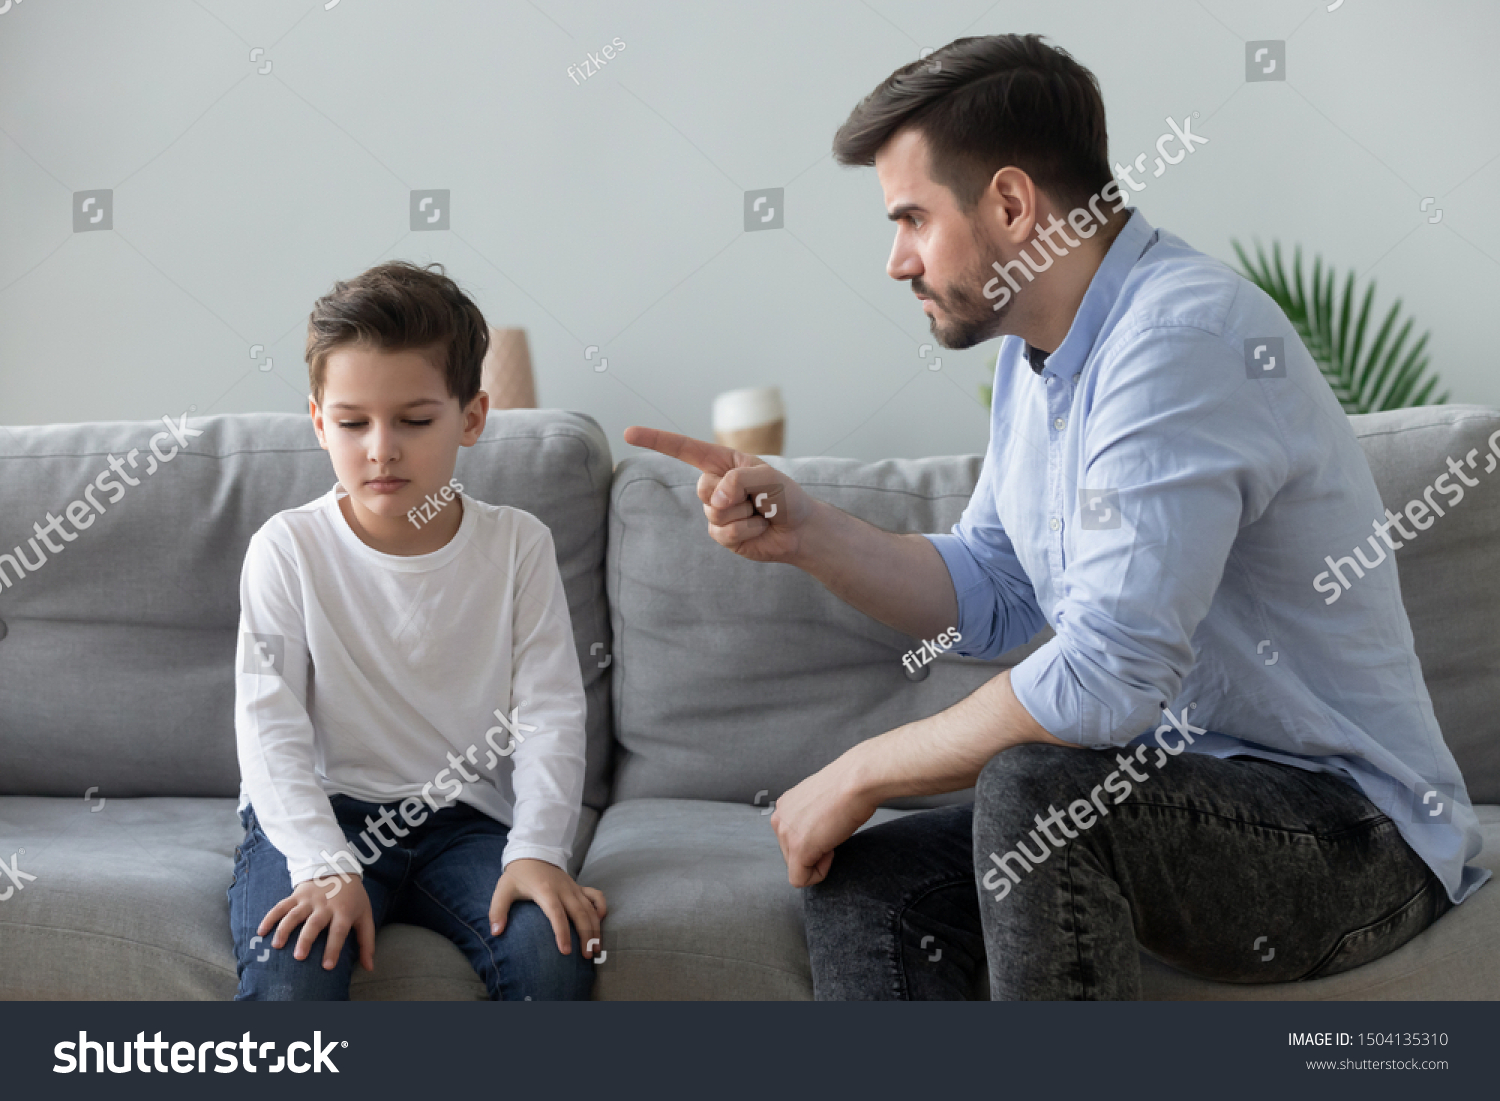 Angry mad father scolding lecturing sad preschool kid son for bad behavior at home, serious parent dad punish little upset guilty child boy pointing finger demand discipline, family conflicts concept #1504135310